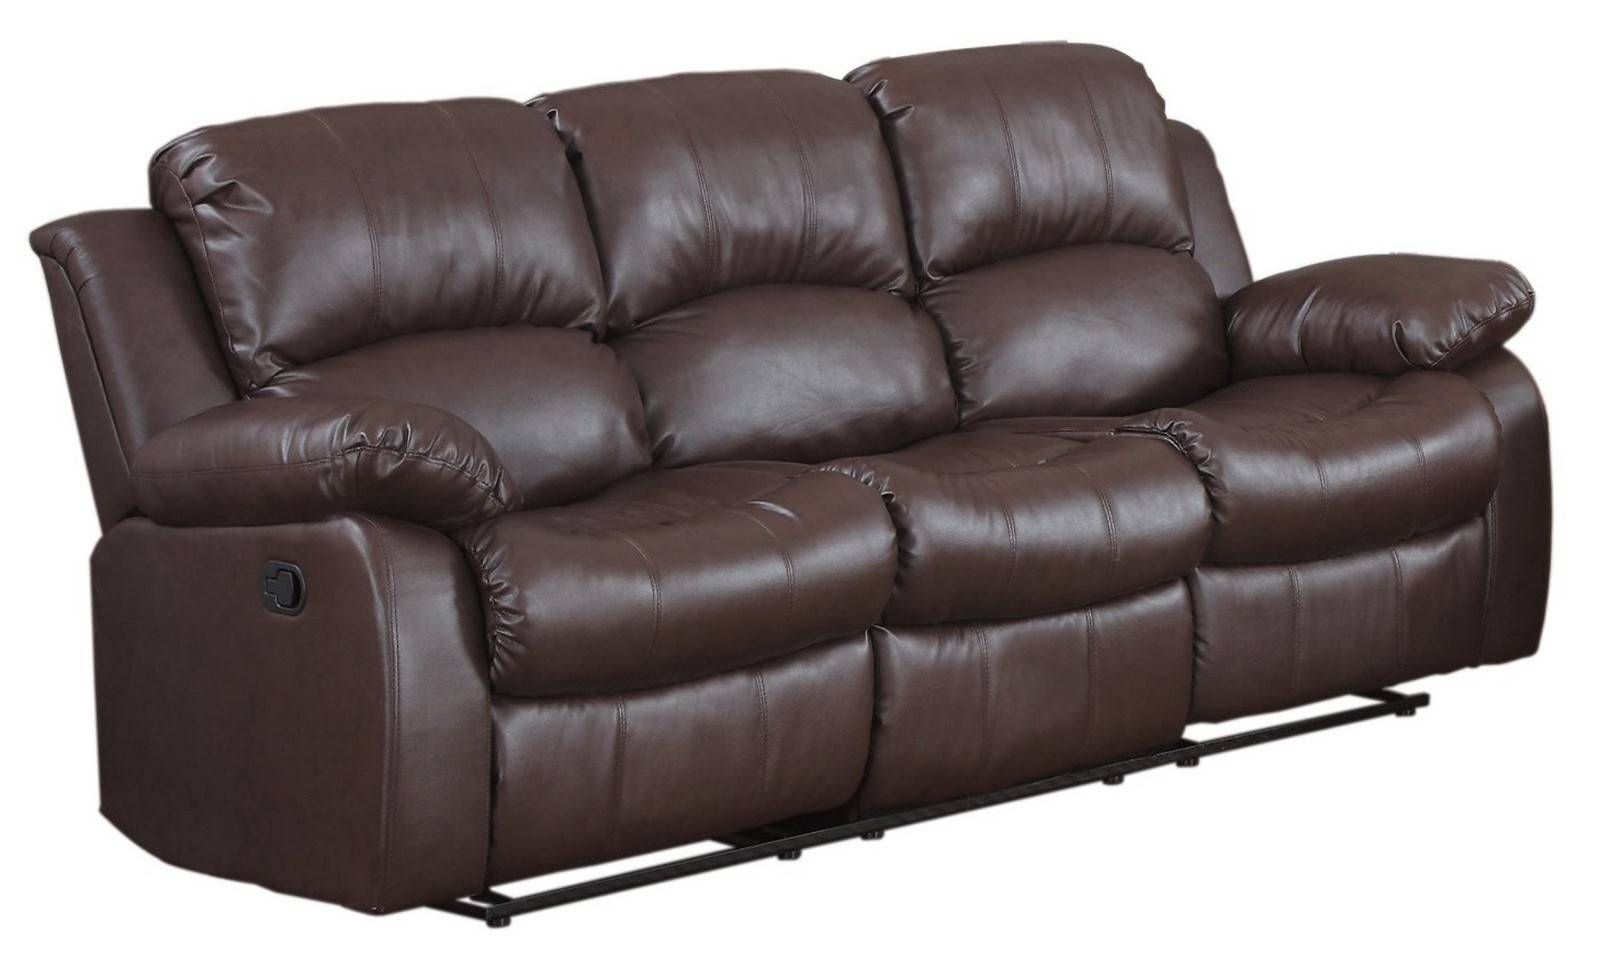 Sofa : Best 3 Seater Leather Sofa Recliner Style Home Design Pertaining To 3 Seater Leather Sofas (View 20 of 30)